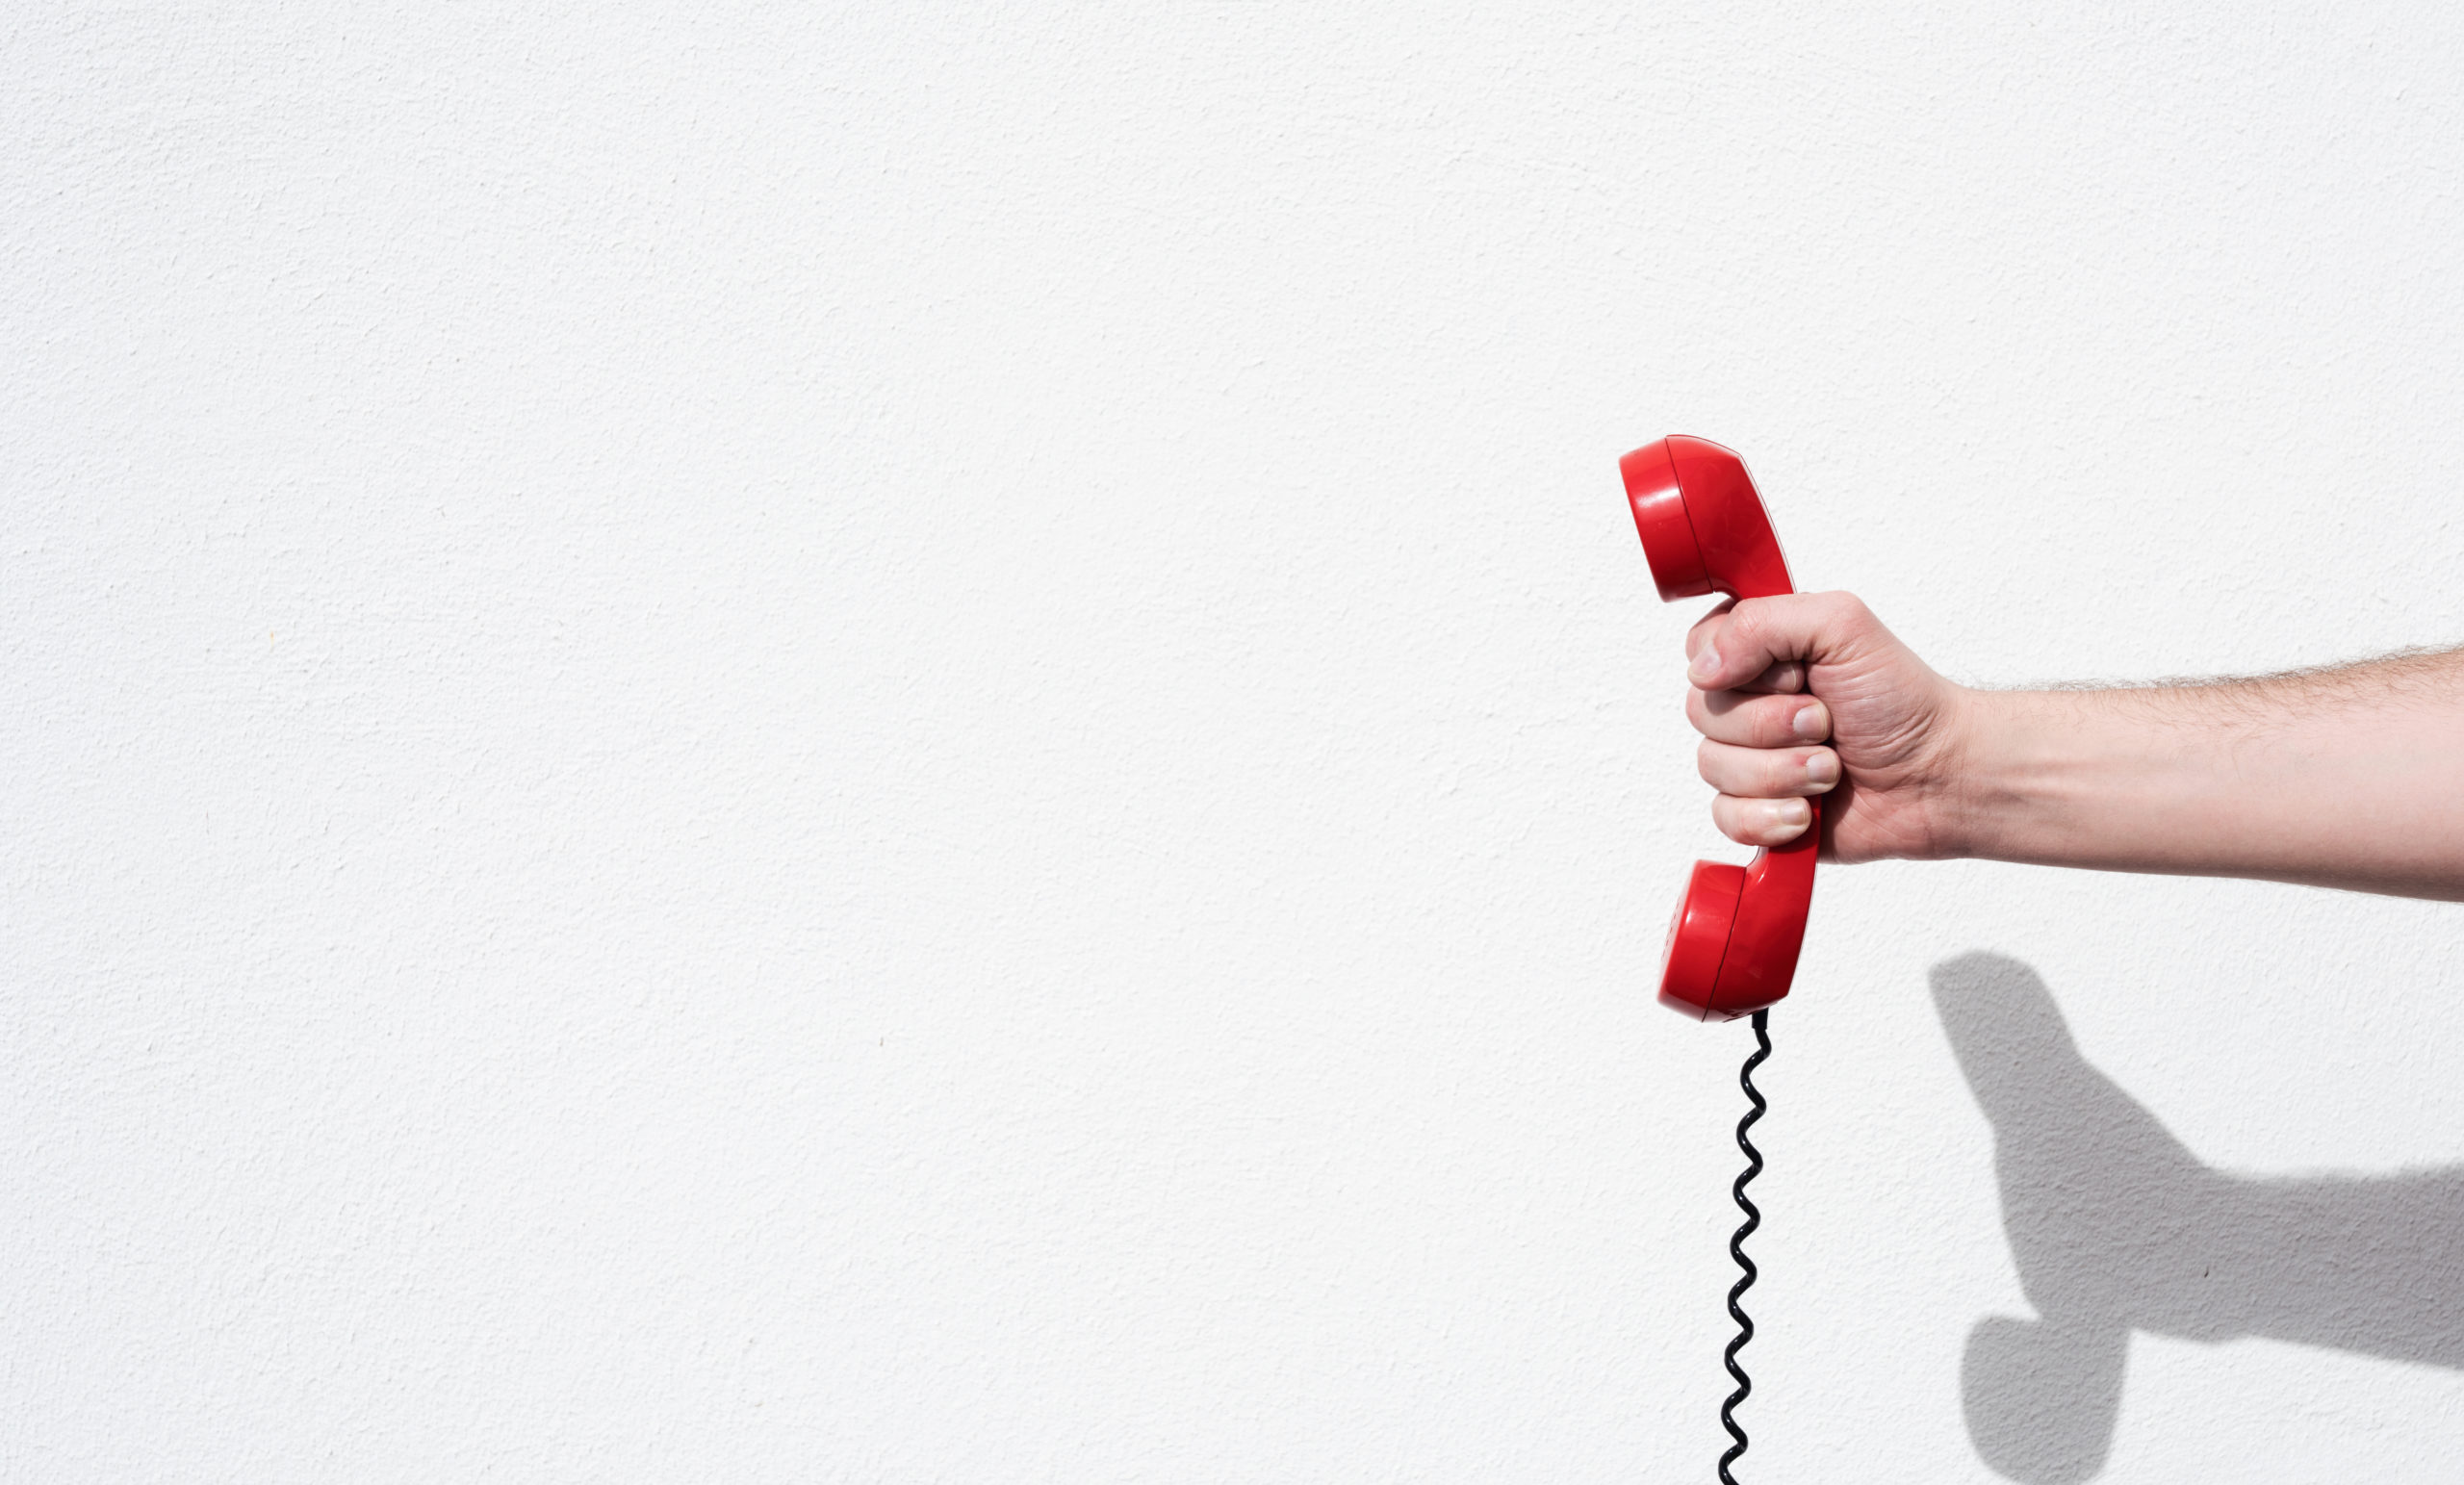 6 ways to make unloved hospital hotlines loved - Consultant Connect